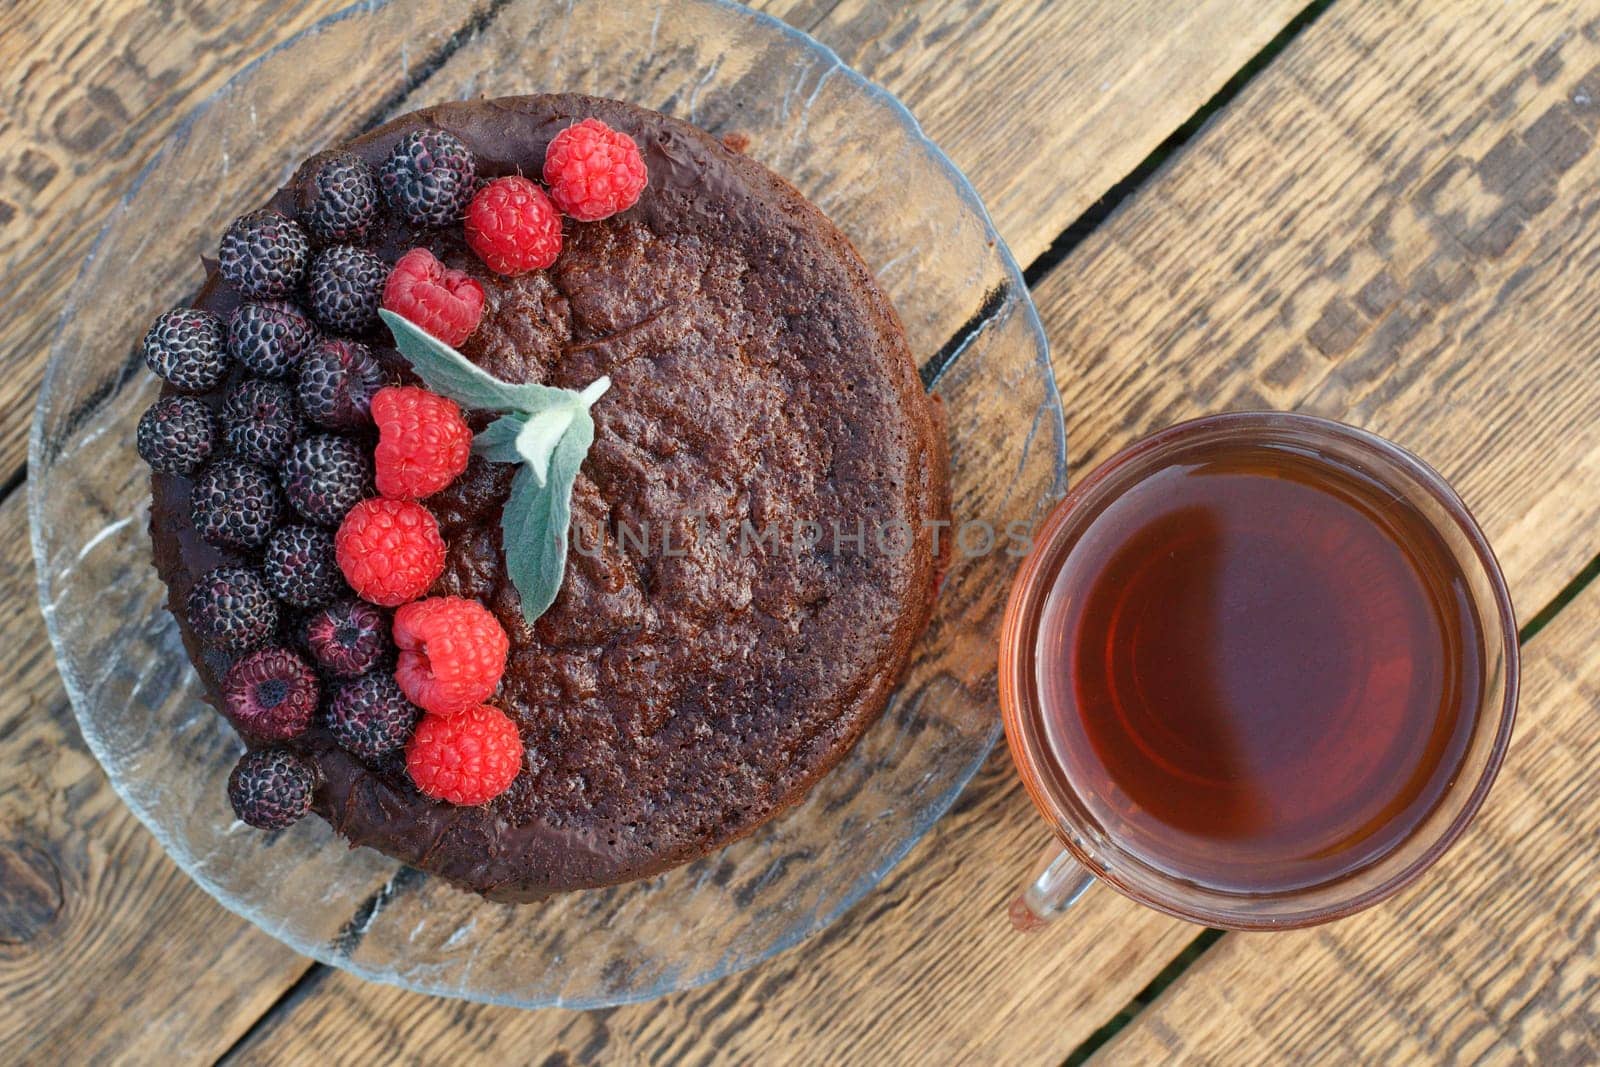 Homemade chocolate cake decorated with mint leaves, black and red raspberries on glass plate with cup of tea on wooden boards. Top view.